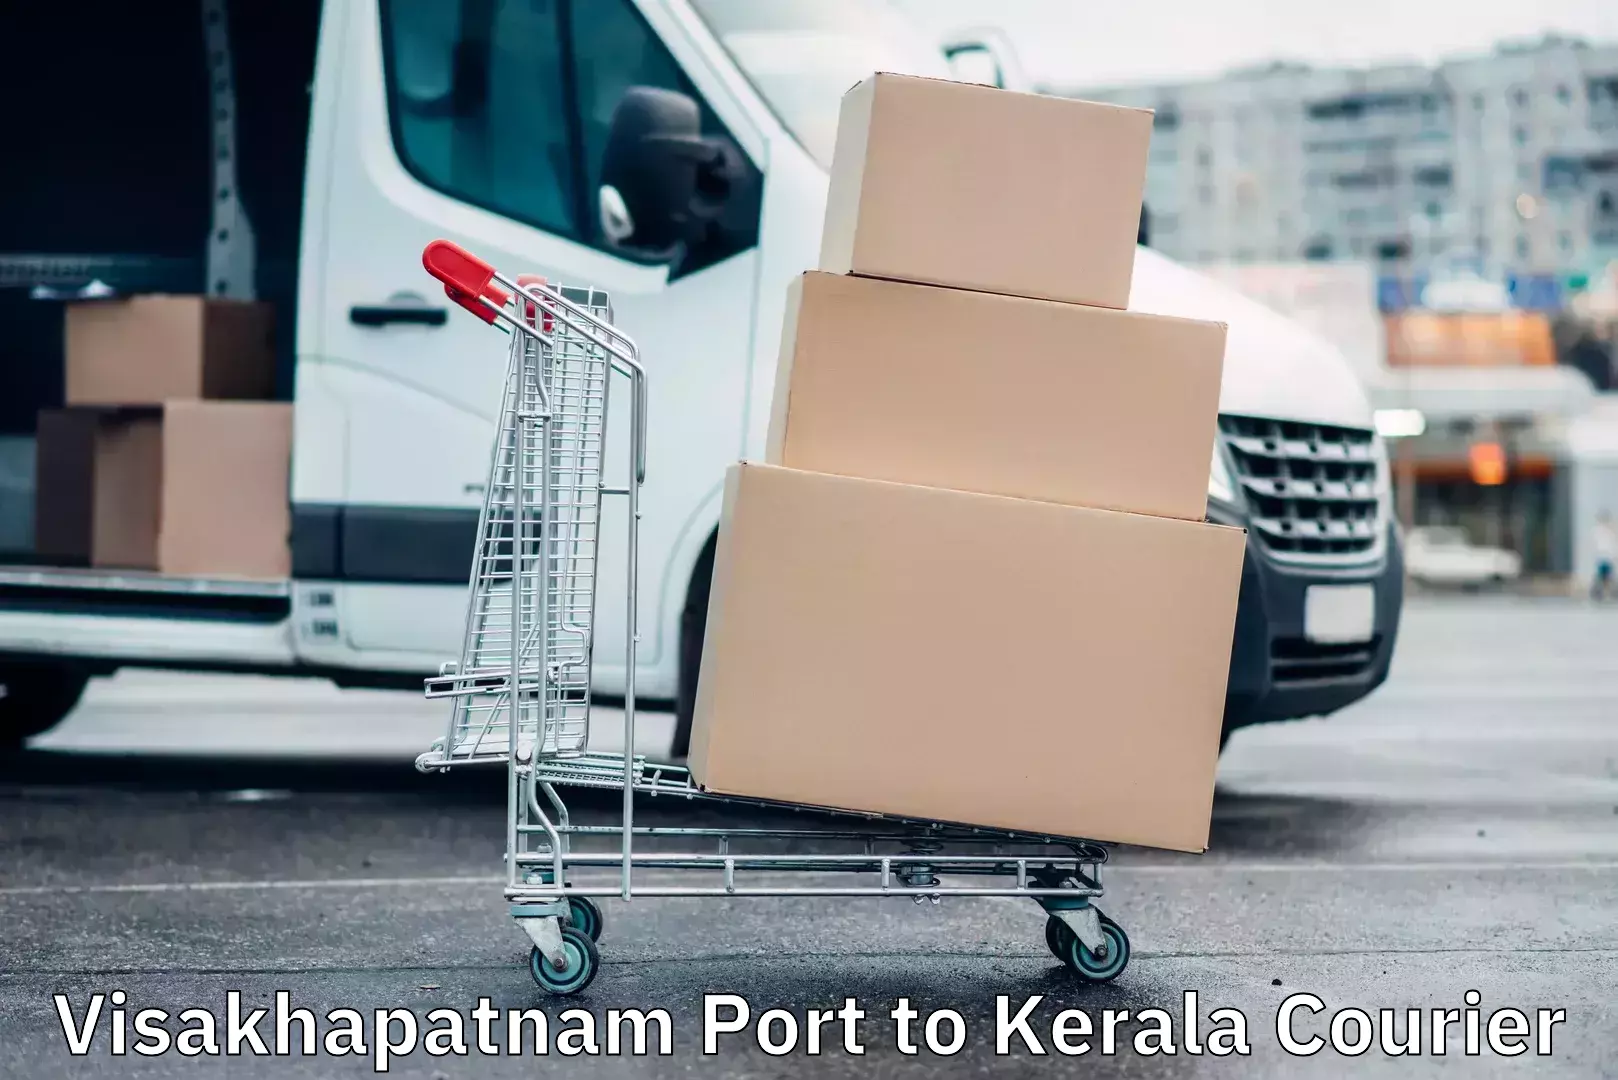 Large package courier Visakhapatnam Port to Kerala